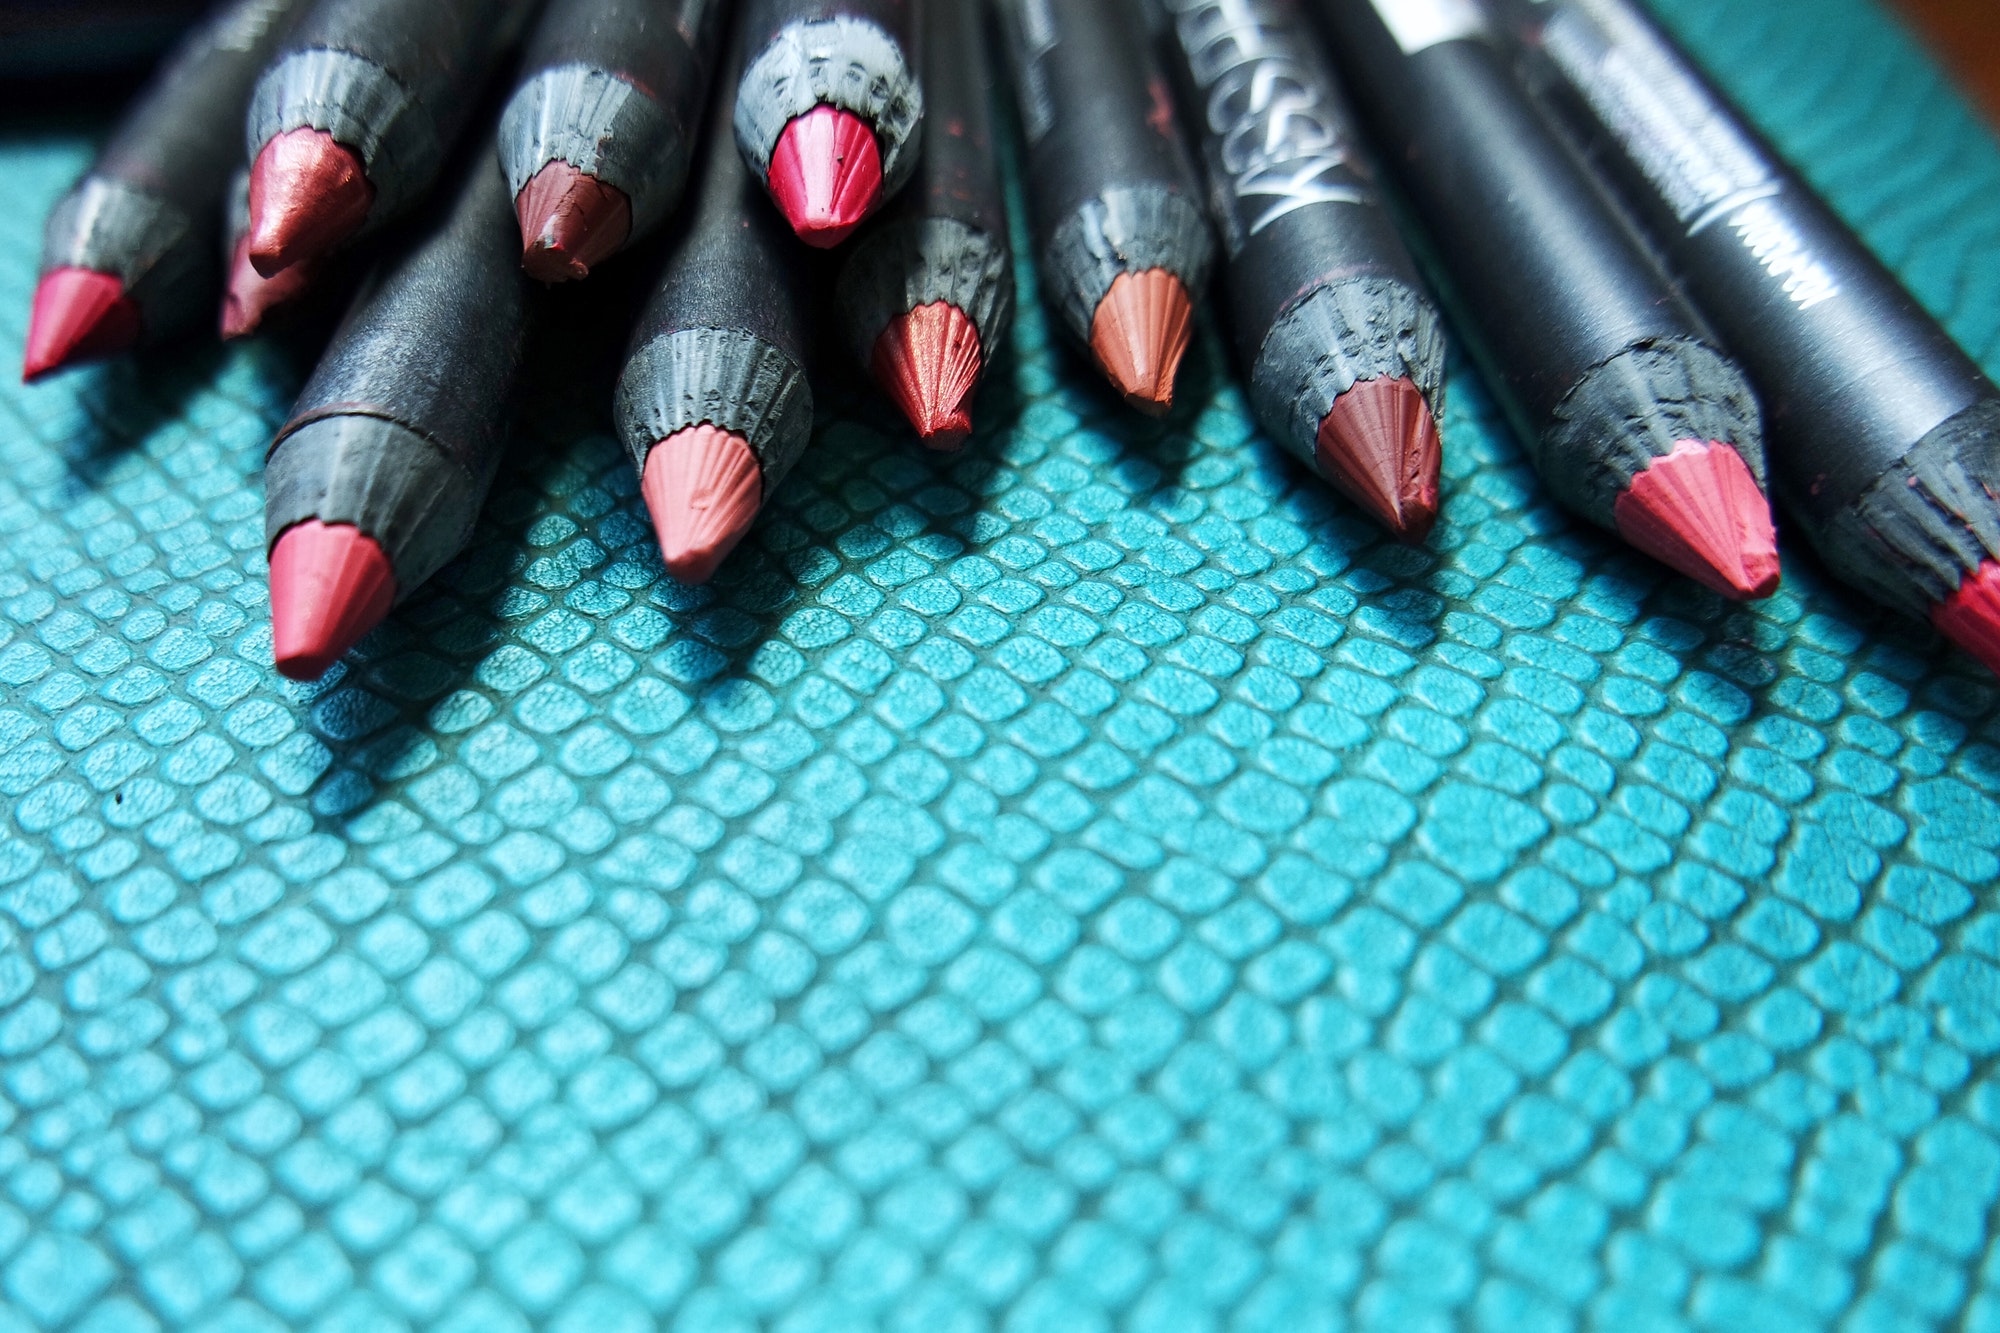 Lip pencils on a turquoise make up bag.